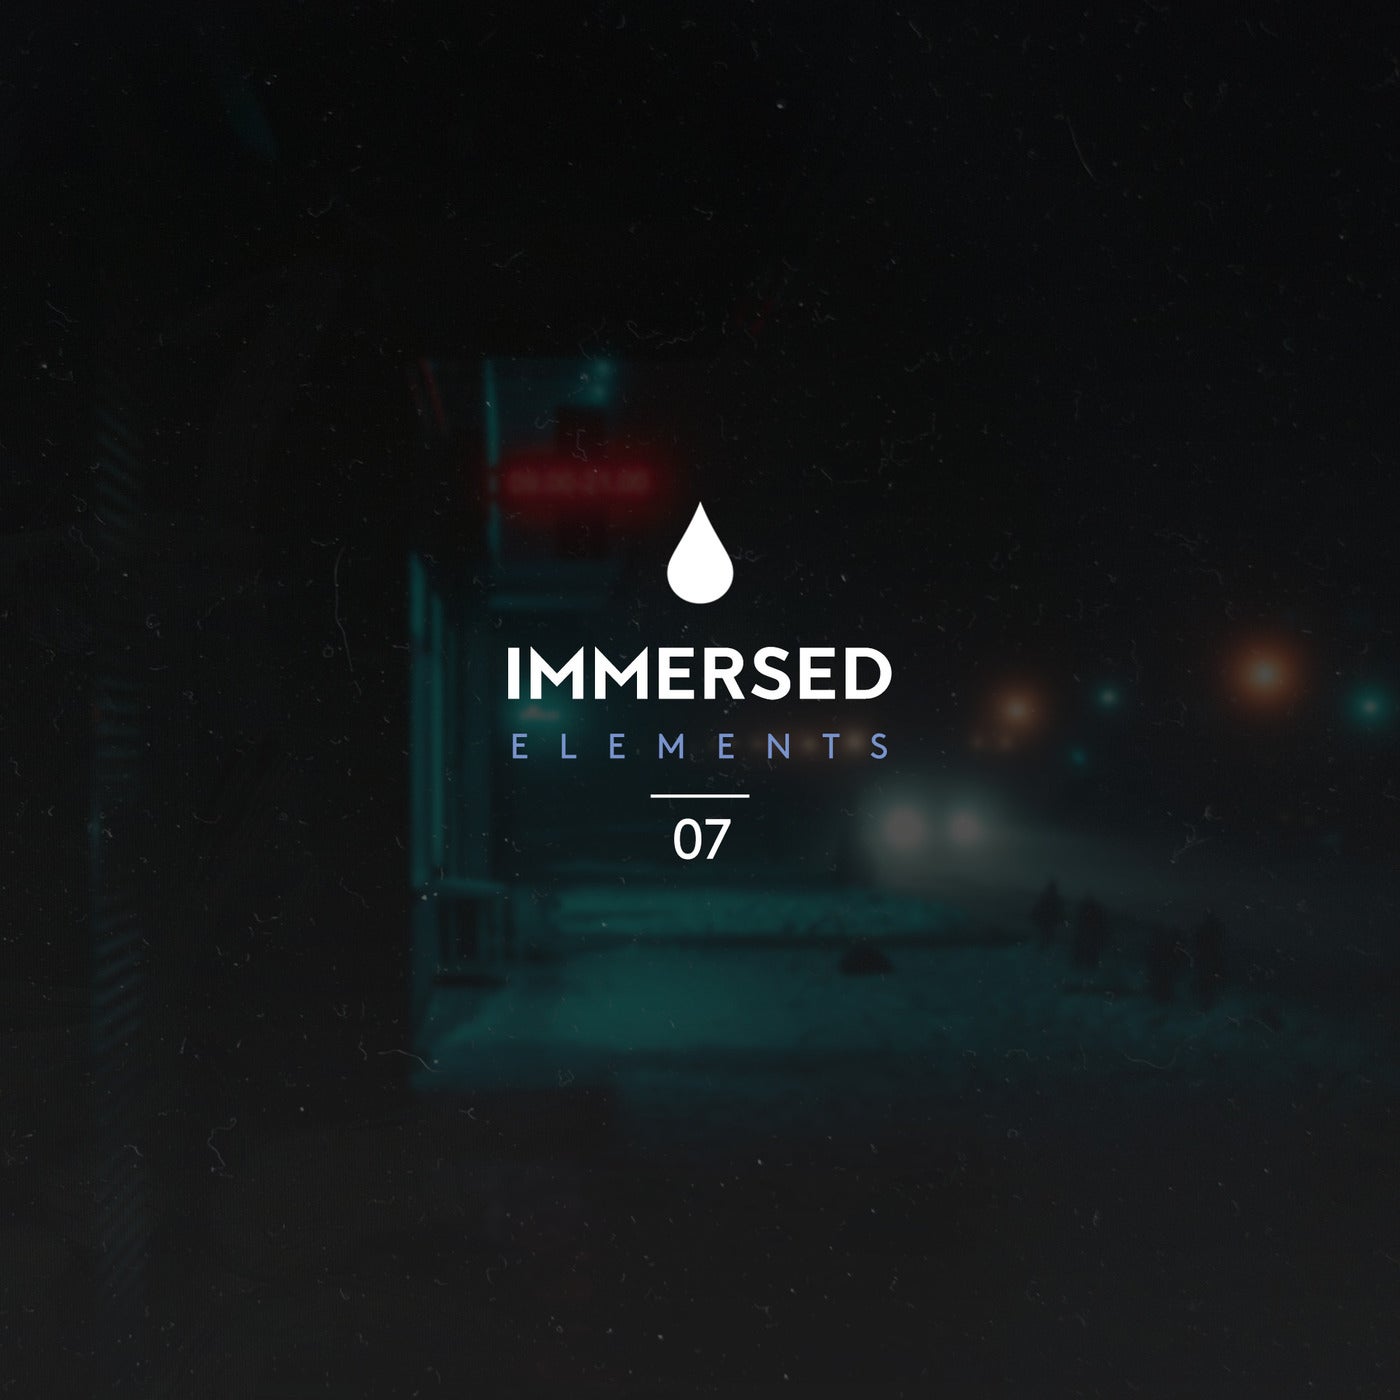 Immersed Elements 07